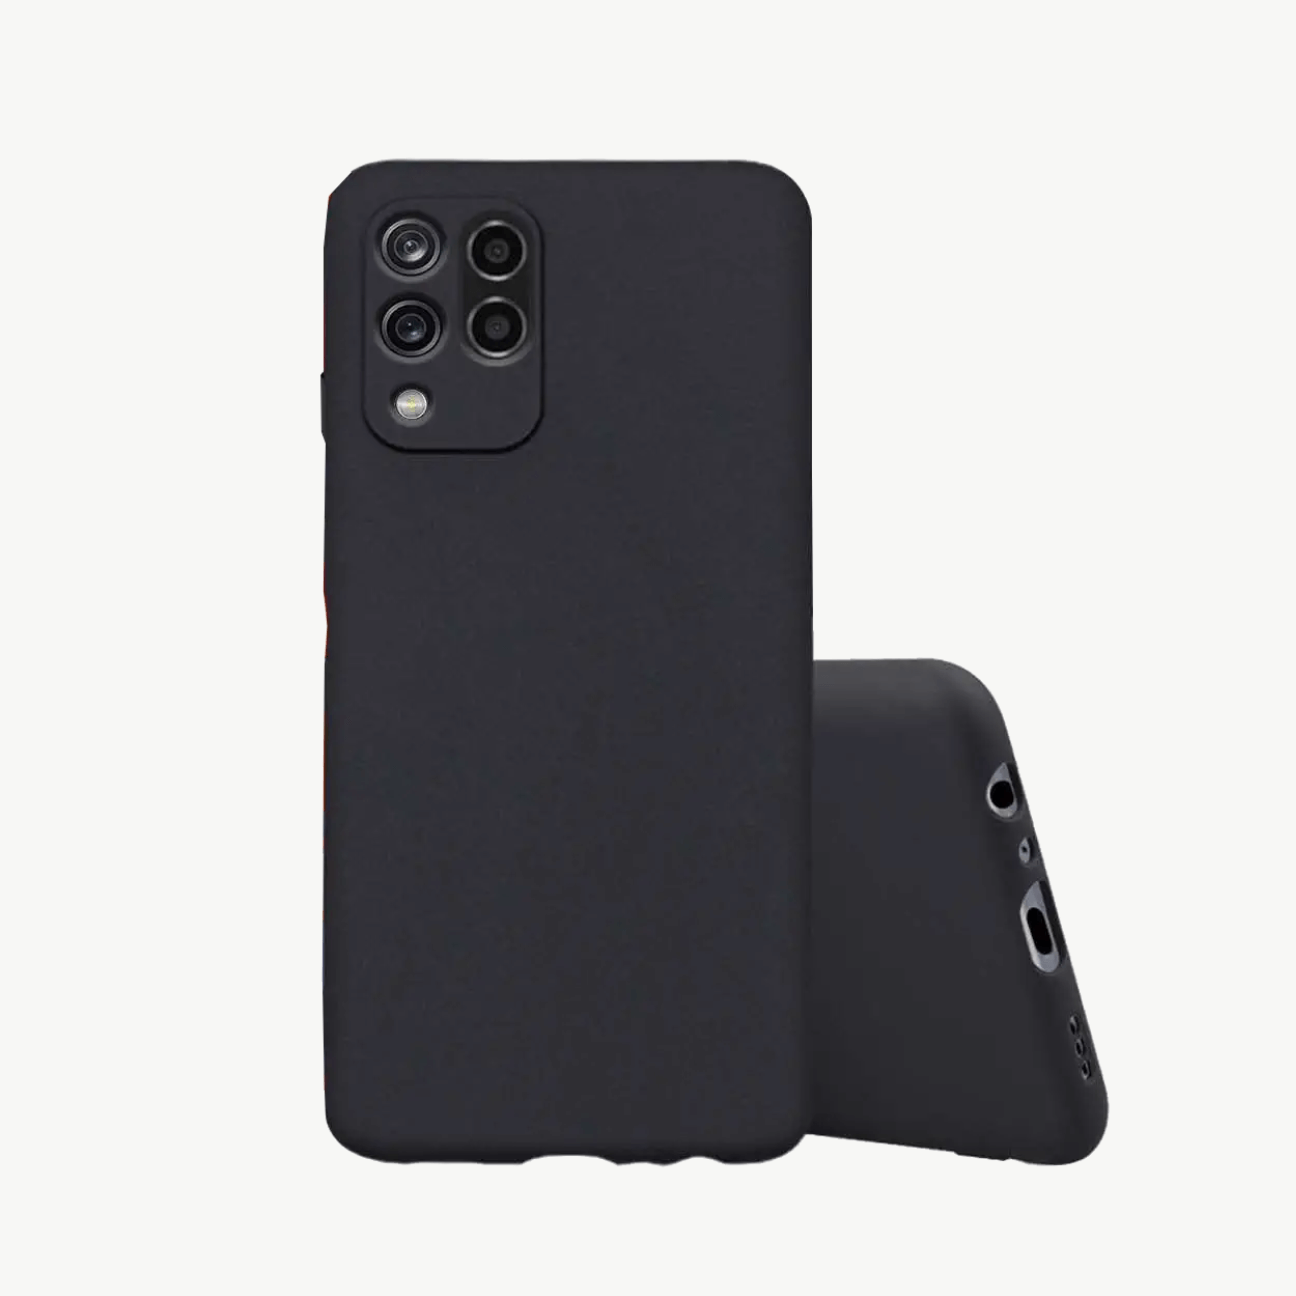 Oppo A5 (Without Fingerprint) Black Soft Silicone Phone Case Image